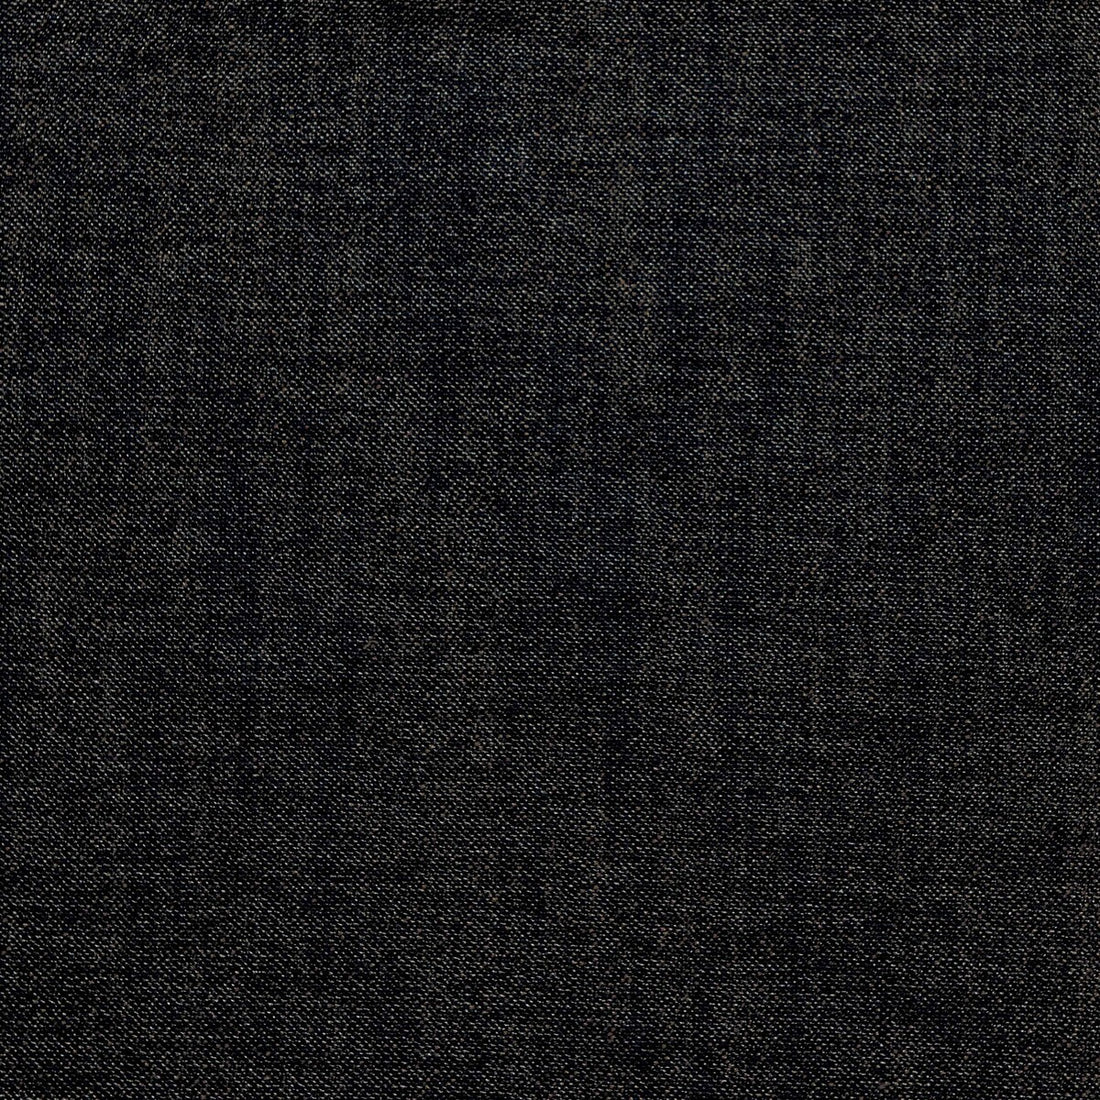 Uganda fabric in black color - pattern GDT5389.9.0 - by Gaston y Daniela in the Gaston Africalia collection